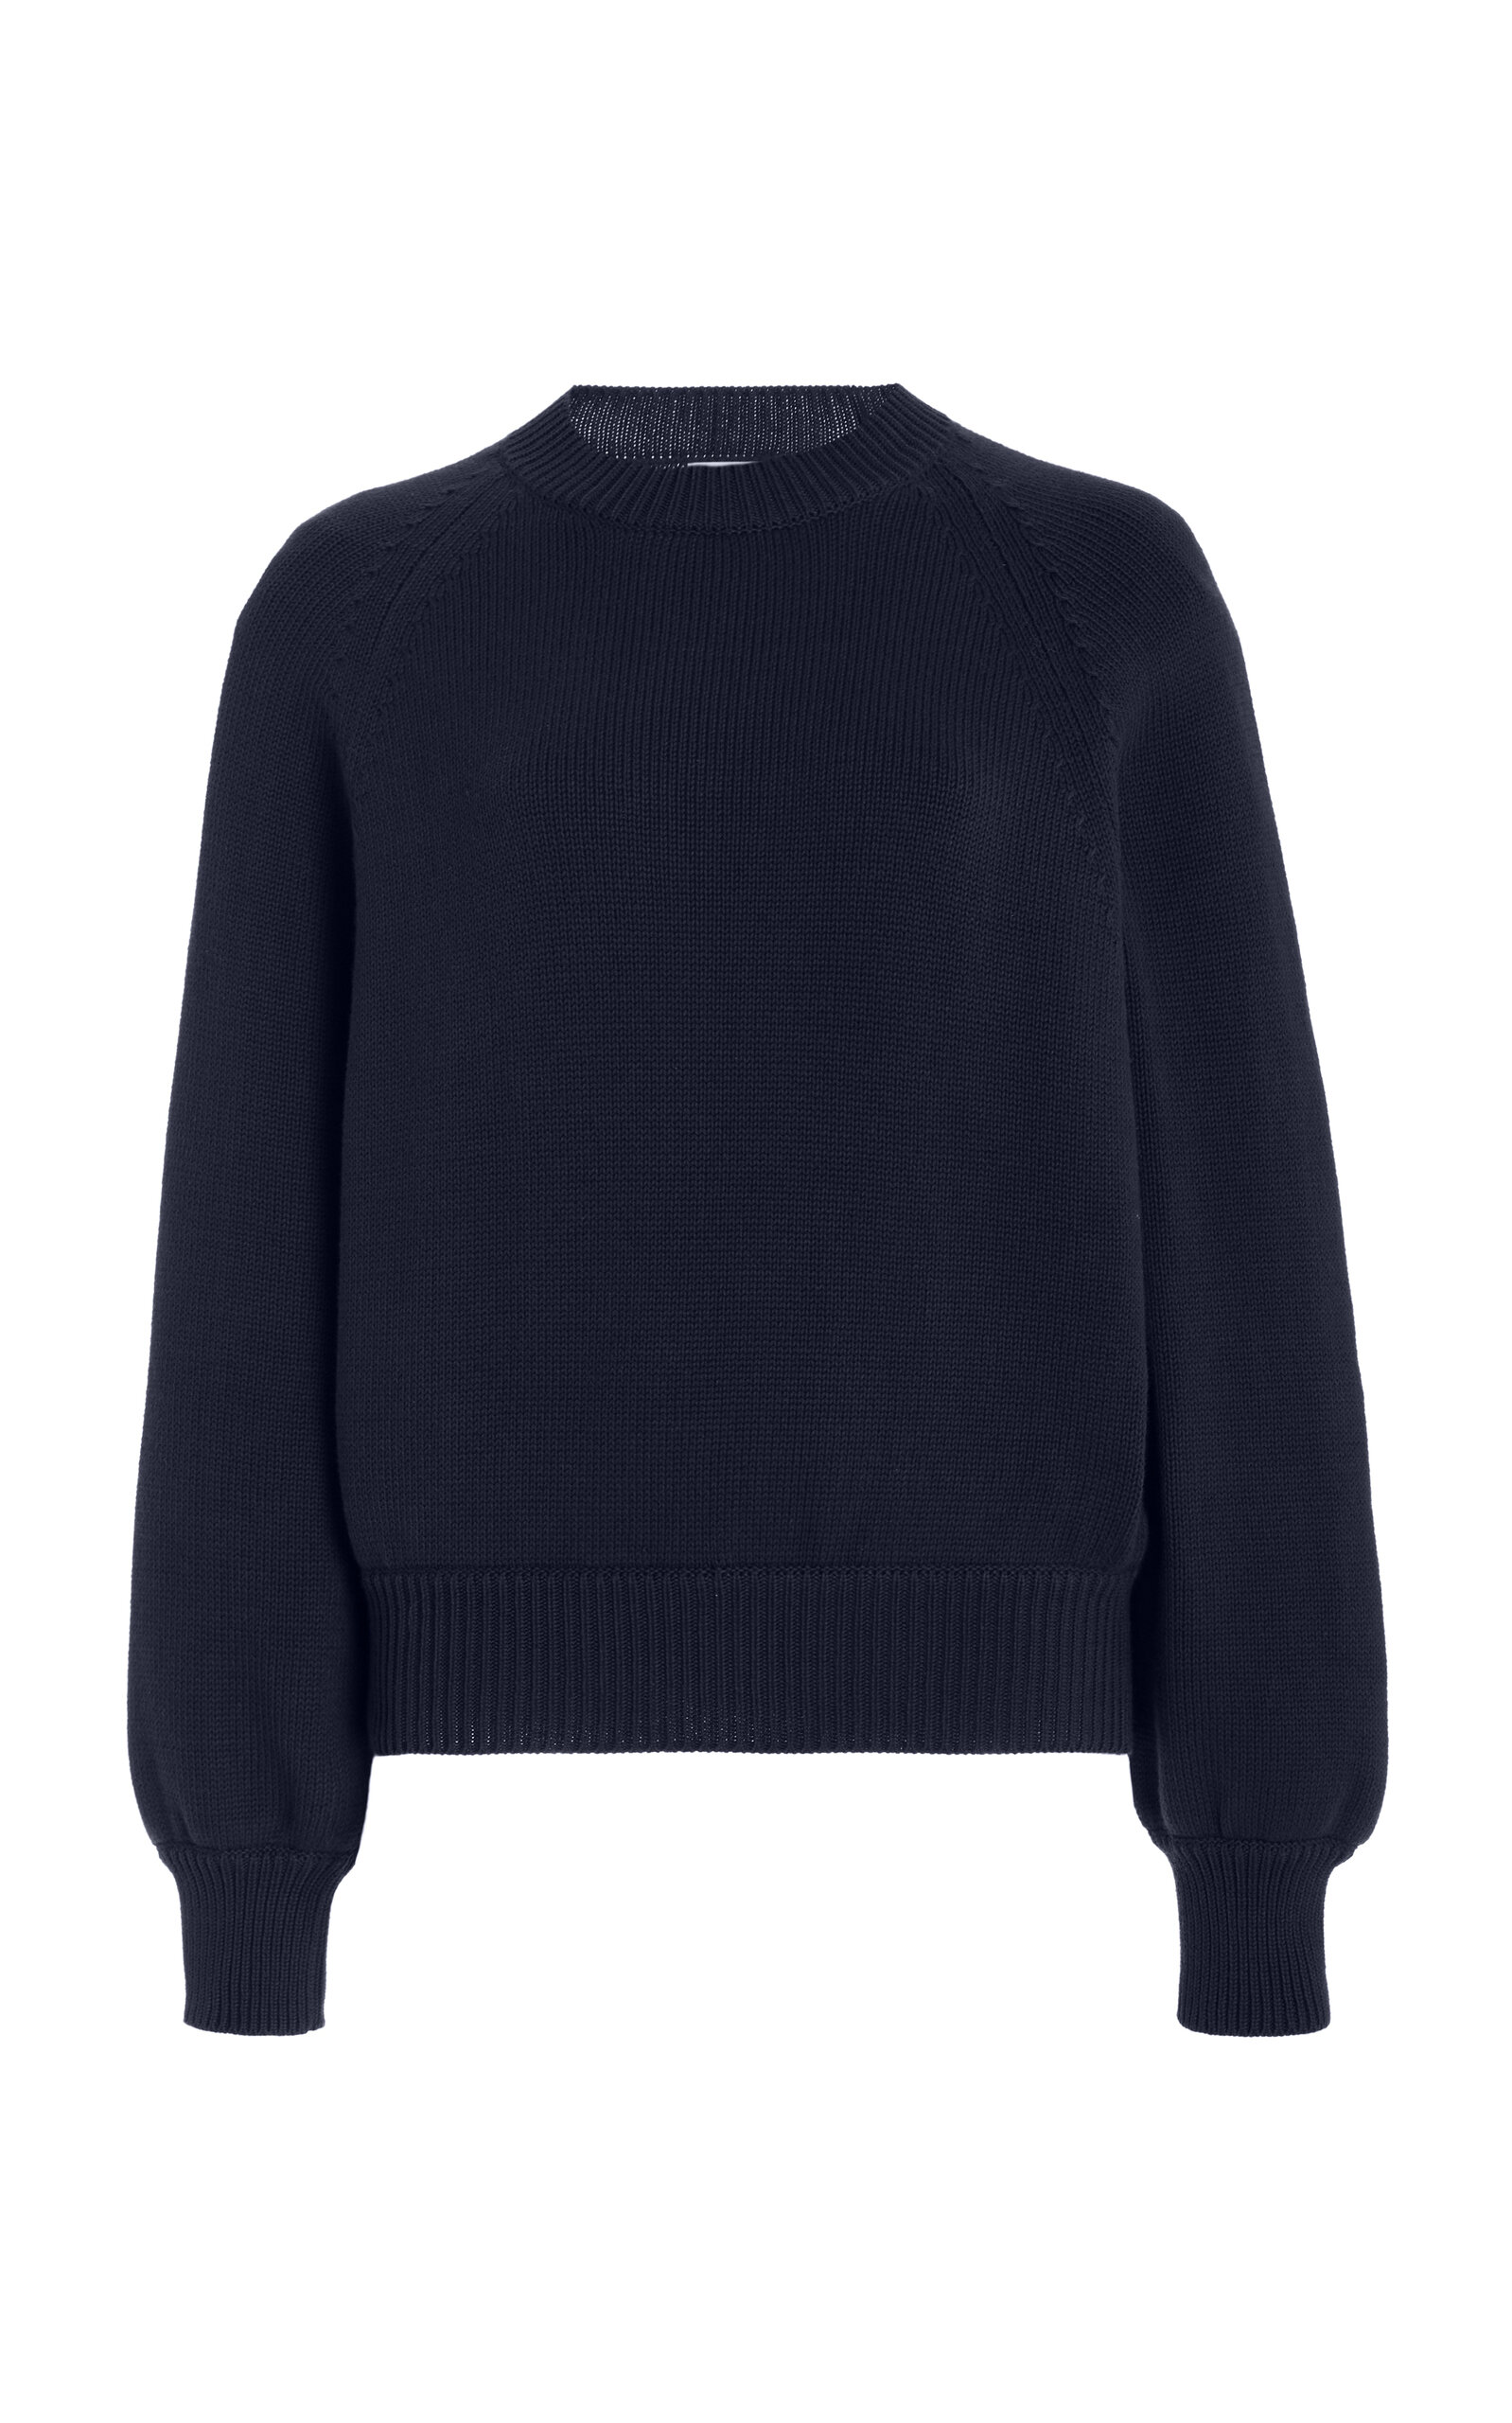 Exclusive Cotton Sweater